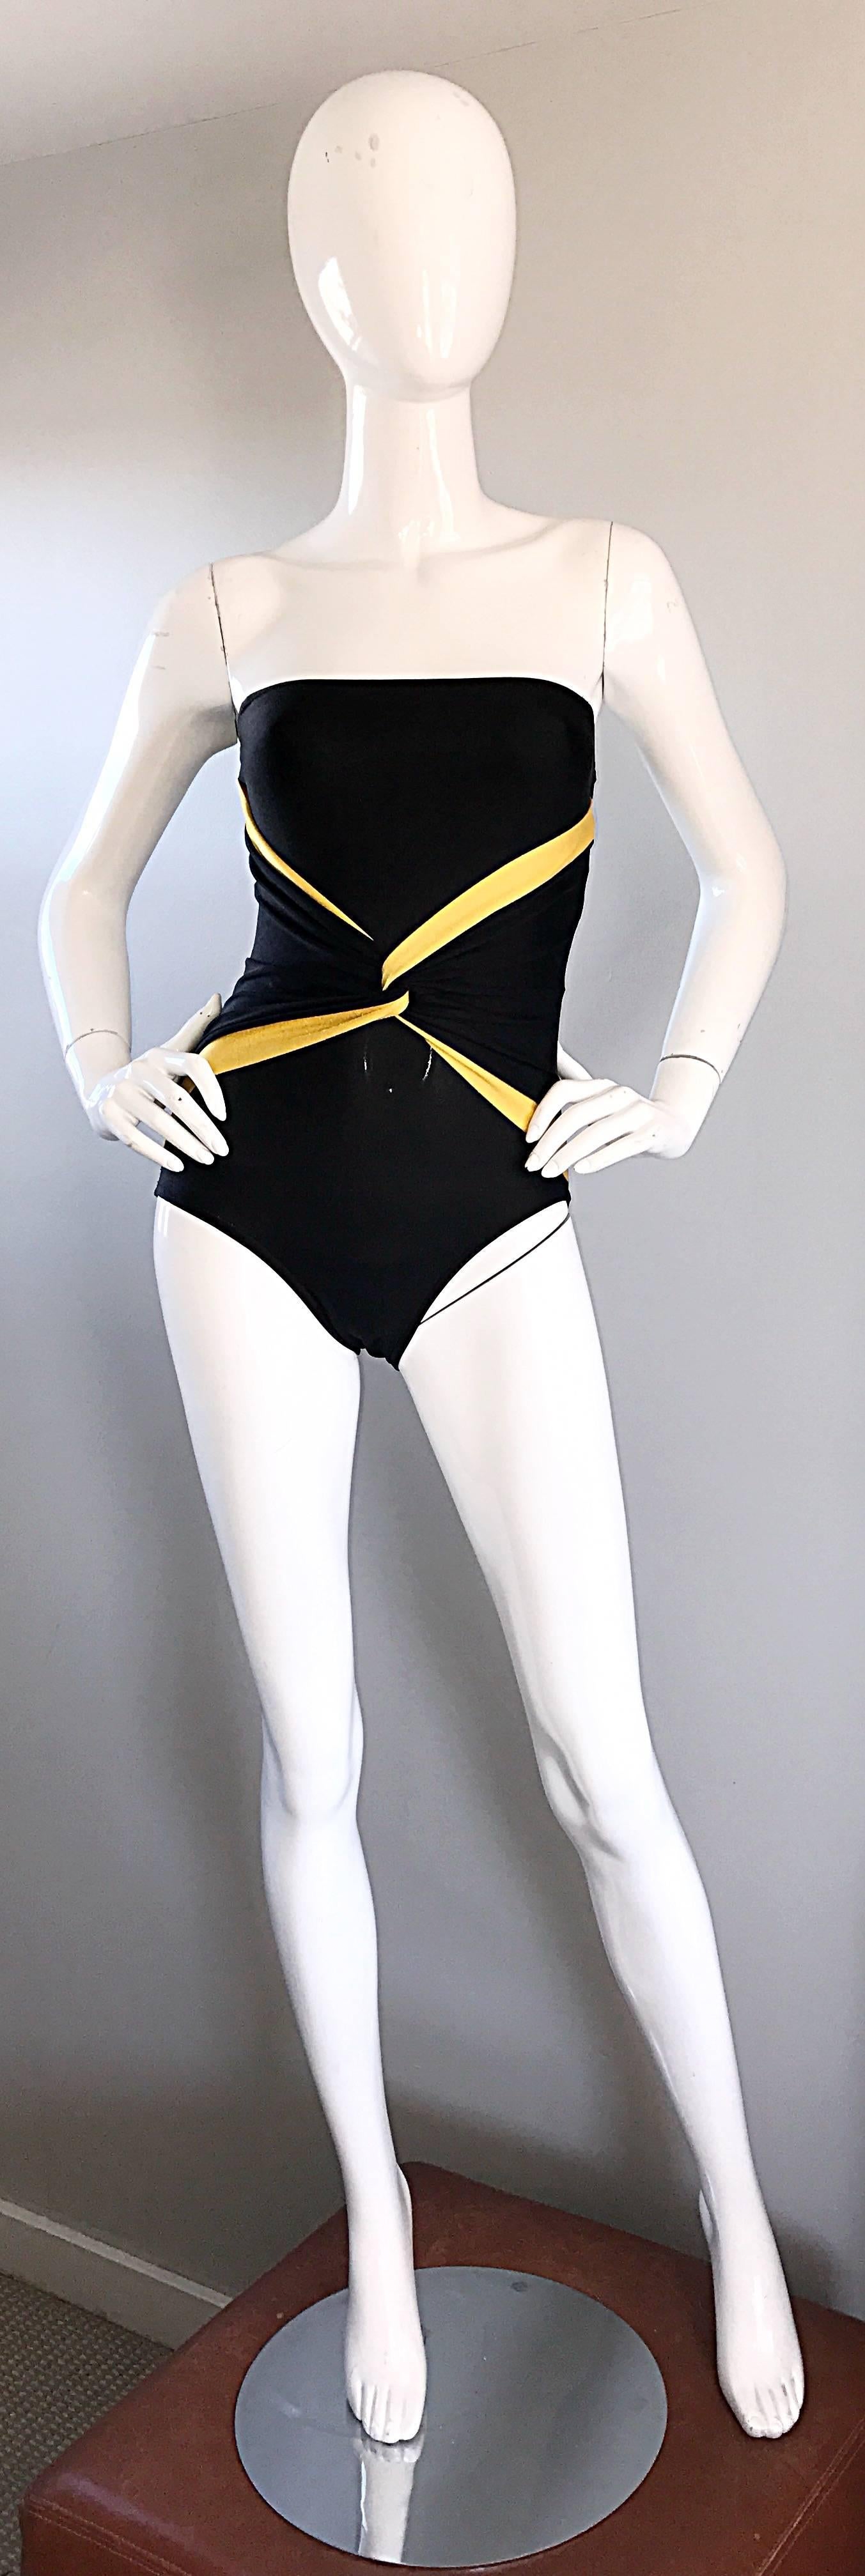 Sexy vintage Early 1990s / 90s OSCAR DE LA RENTA black and yellow 'bumblebee' one piece swimsuit or bodysuit! Strapless style, with lots of stretch. Twisted panels of yellow on the front. Flattering stretch to fit style. Great on the beach, pool or